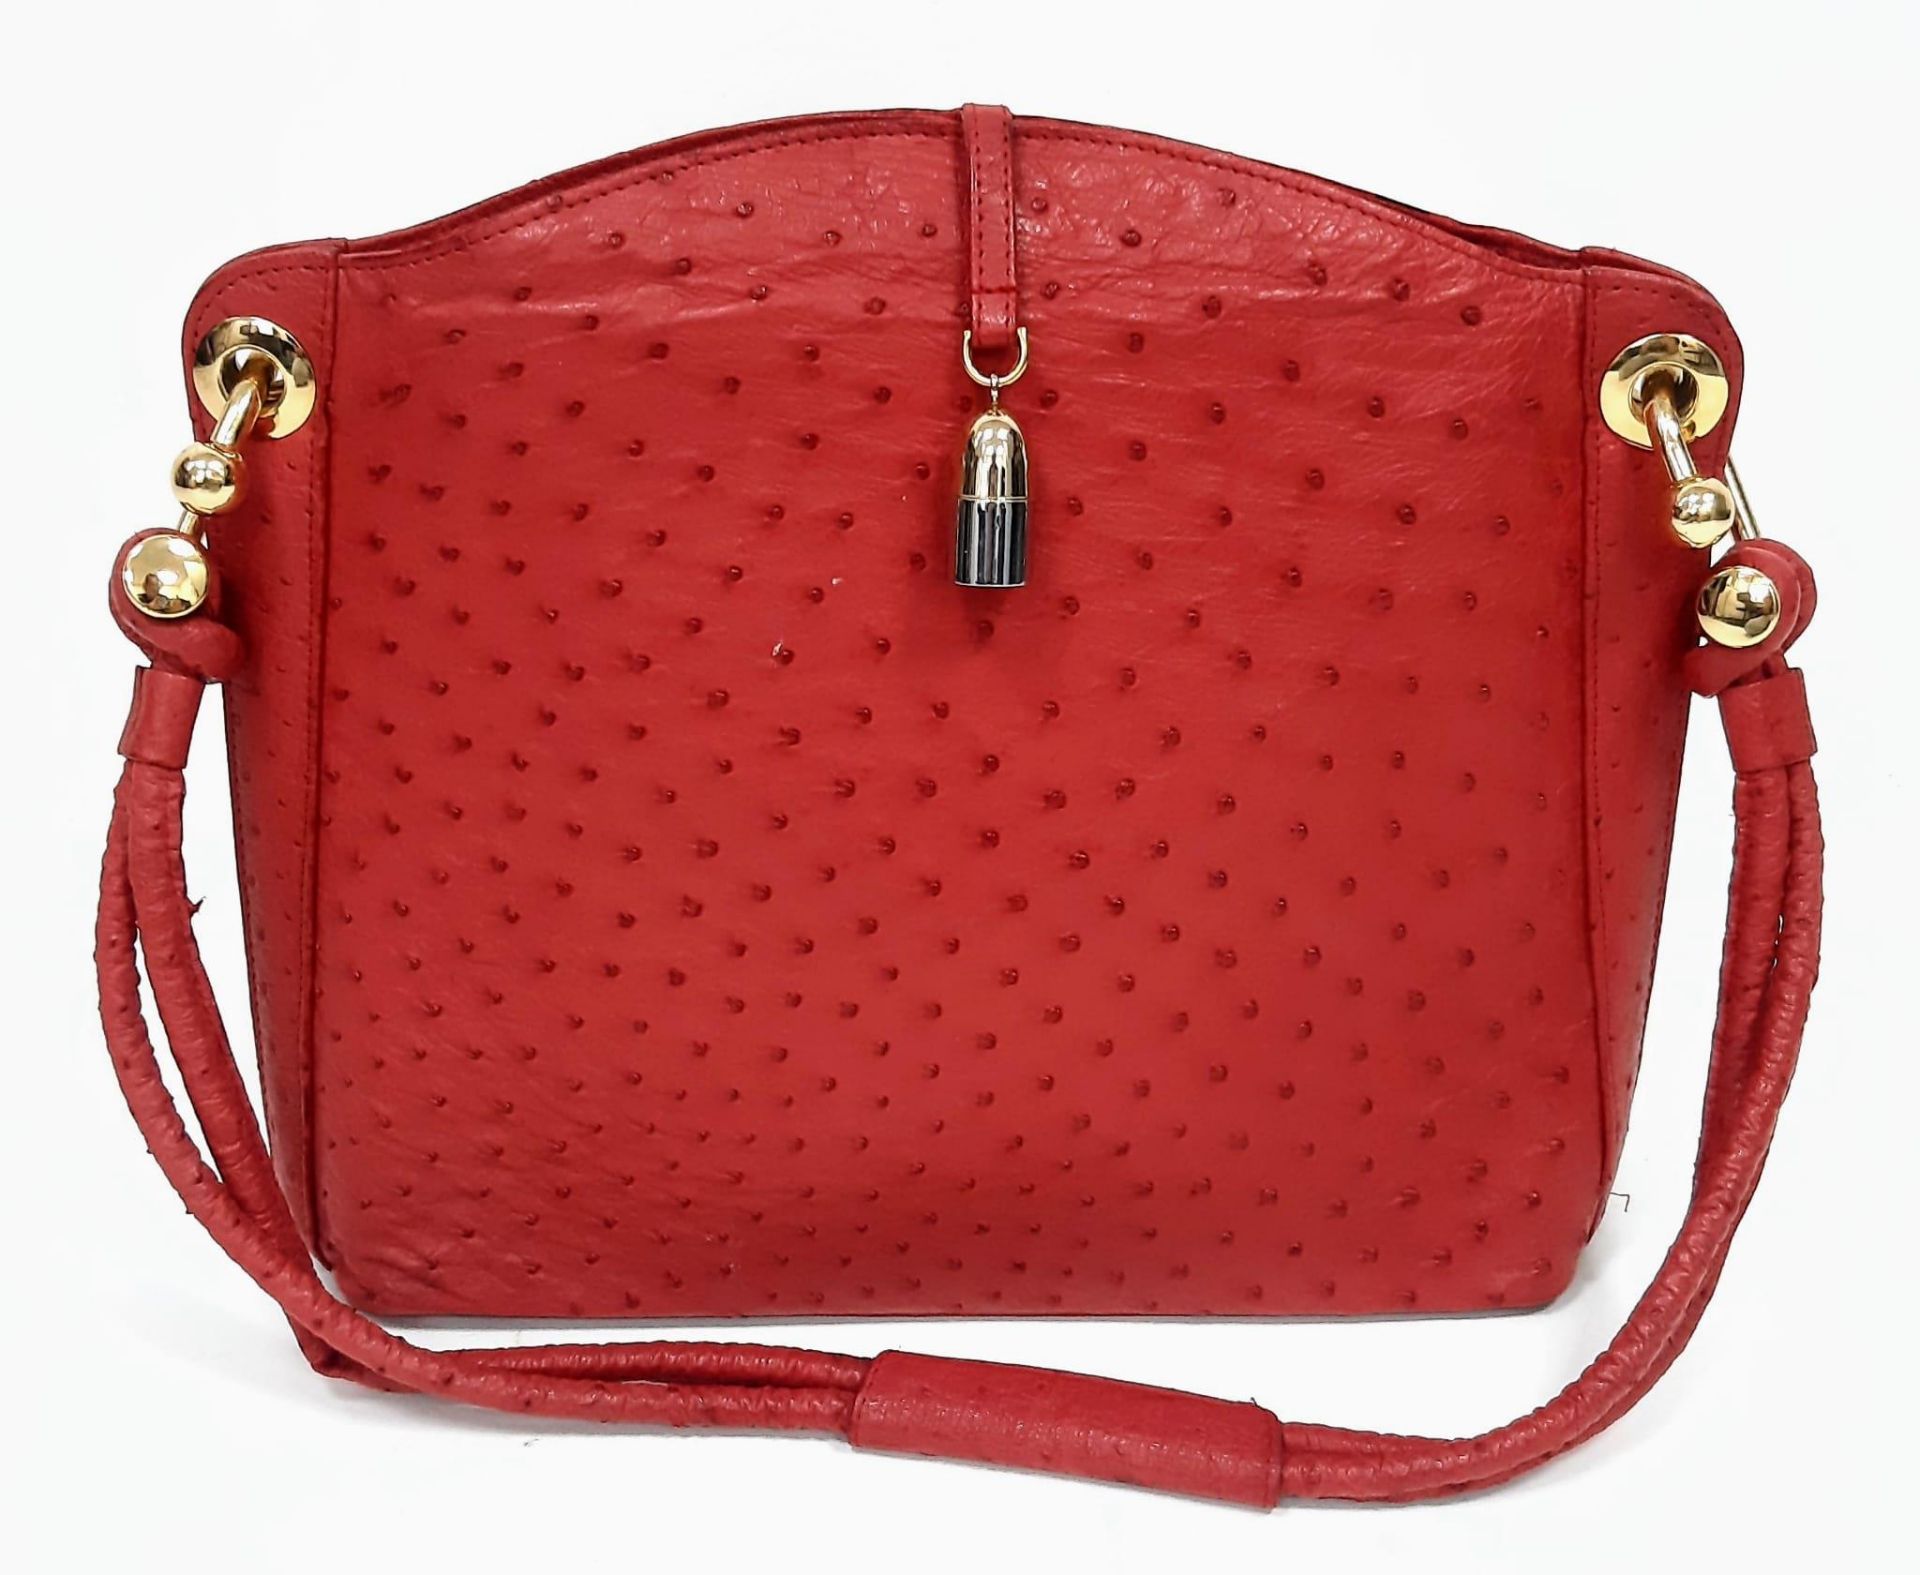 Vintage Red Sabatini Ostrich Leather Handbag. Feels amazing to the touch, gold tone chunky